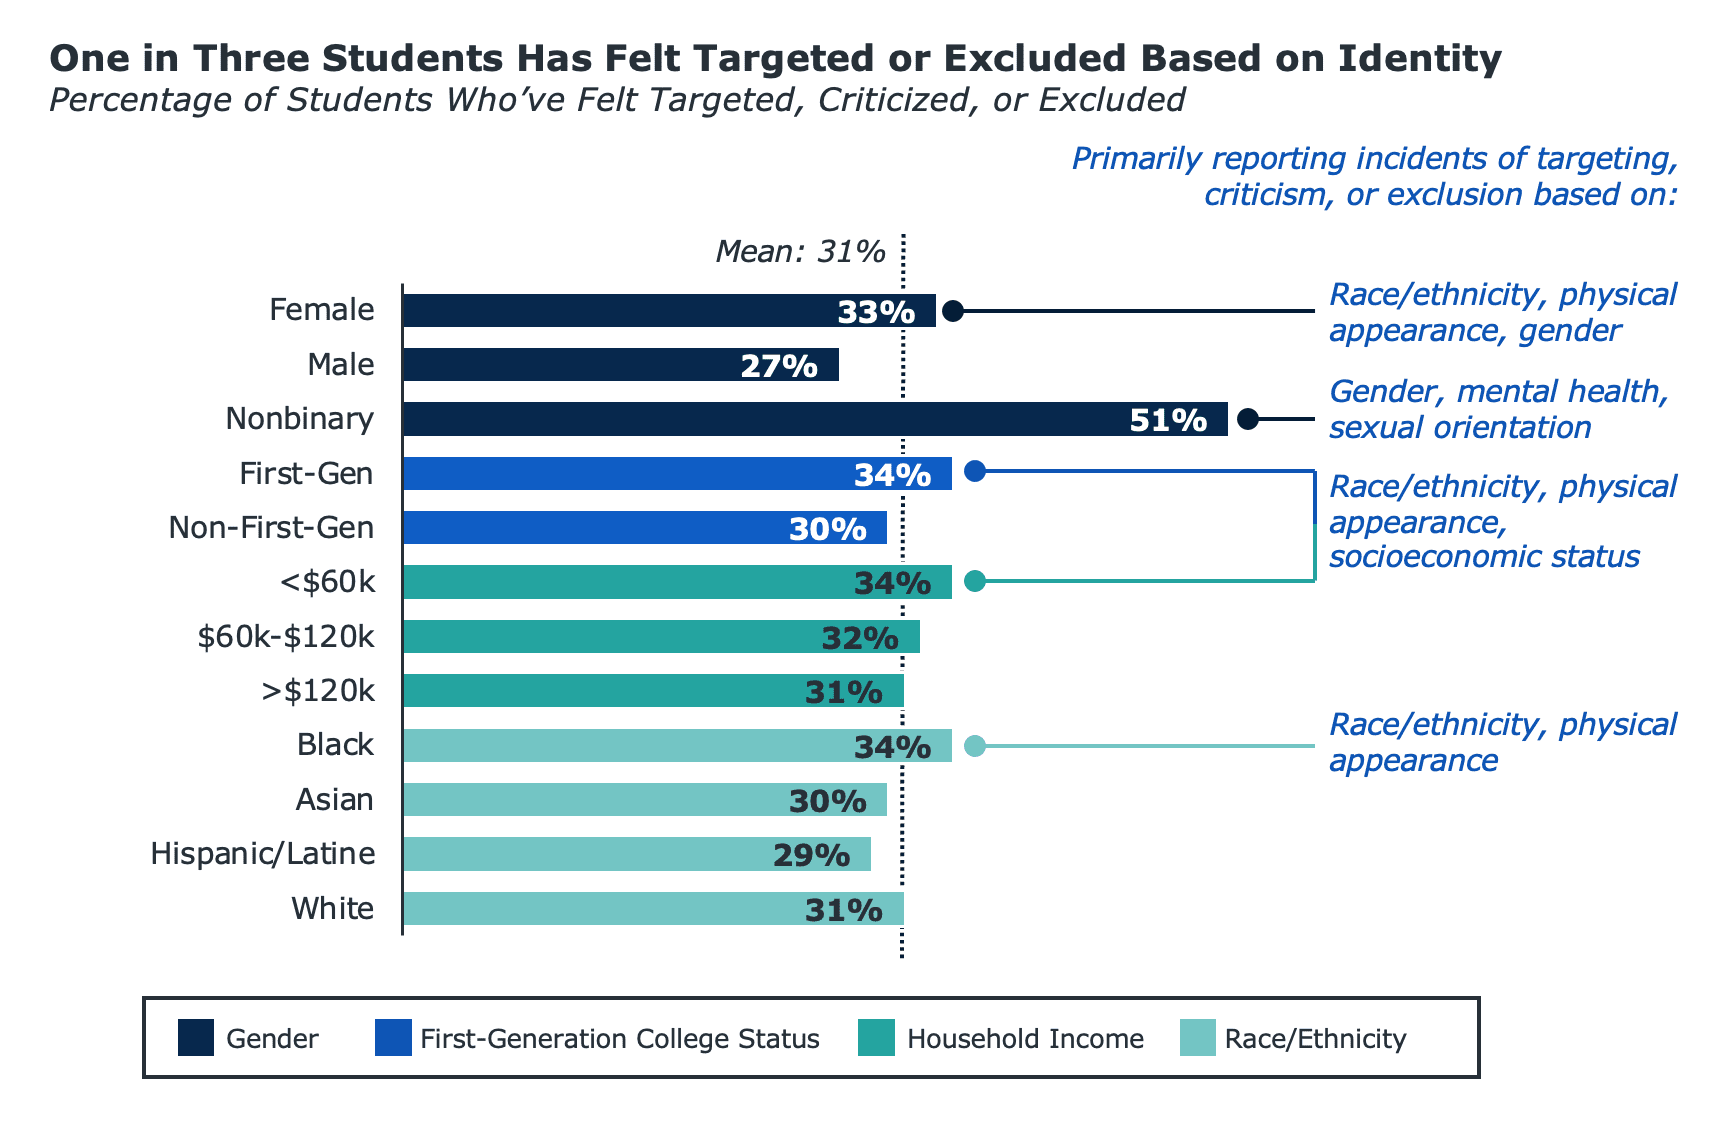 Bar chart describing the percentage of students who have felt targeted, criticized, or excluded based on demographic information.